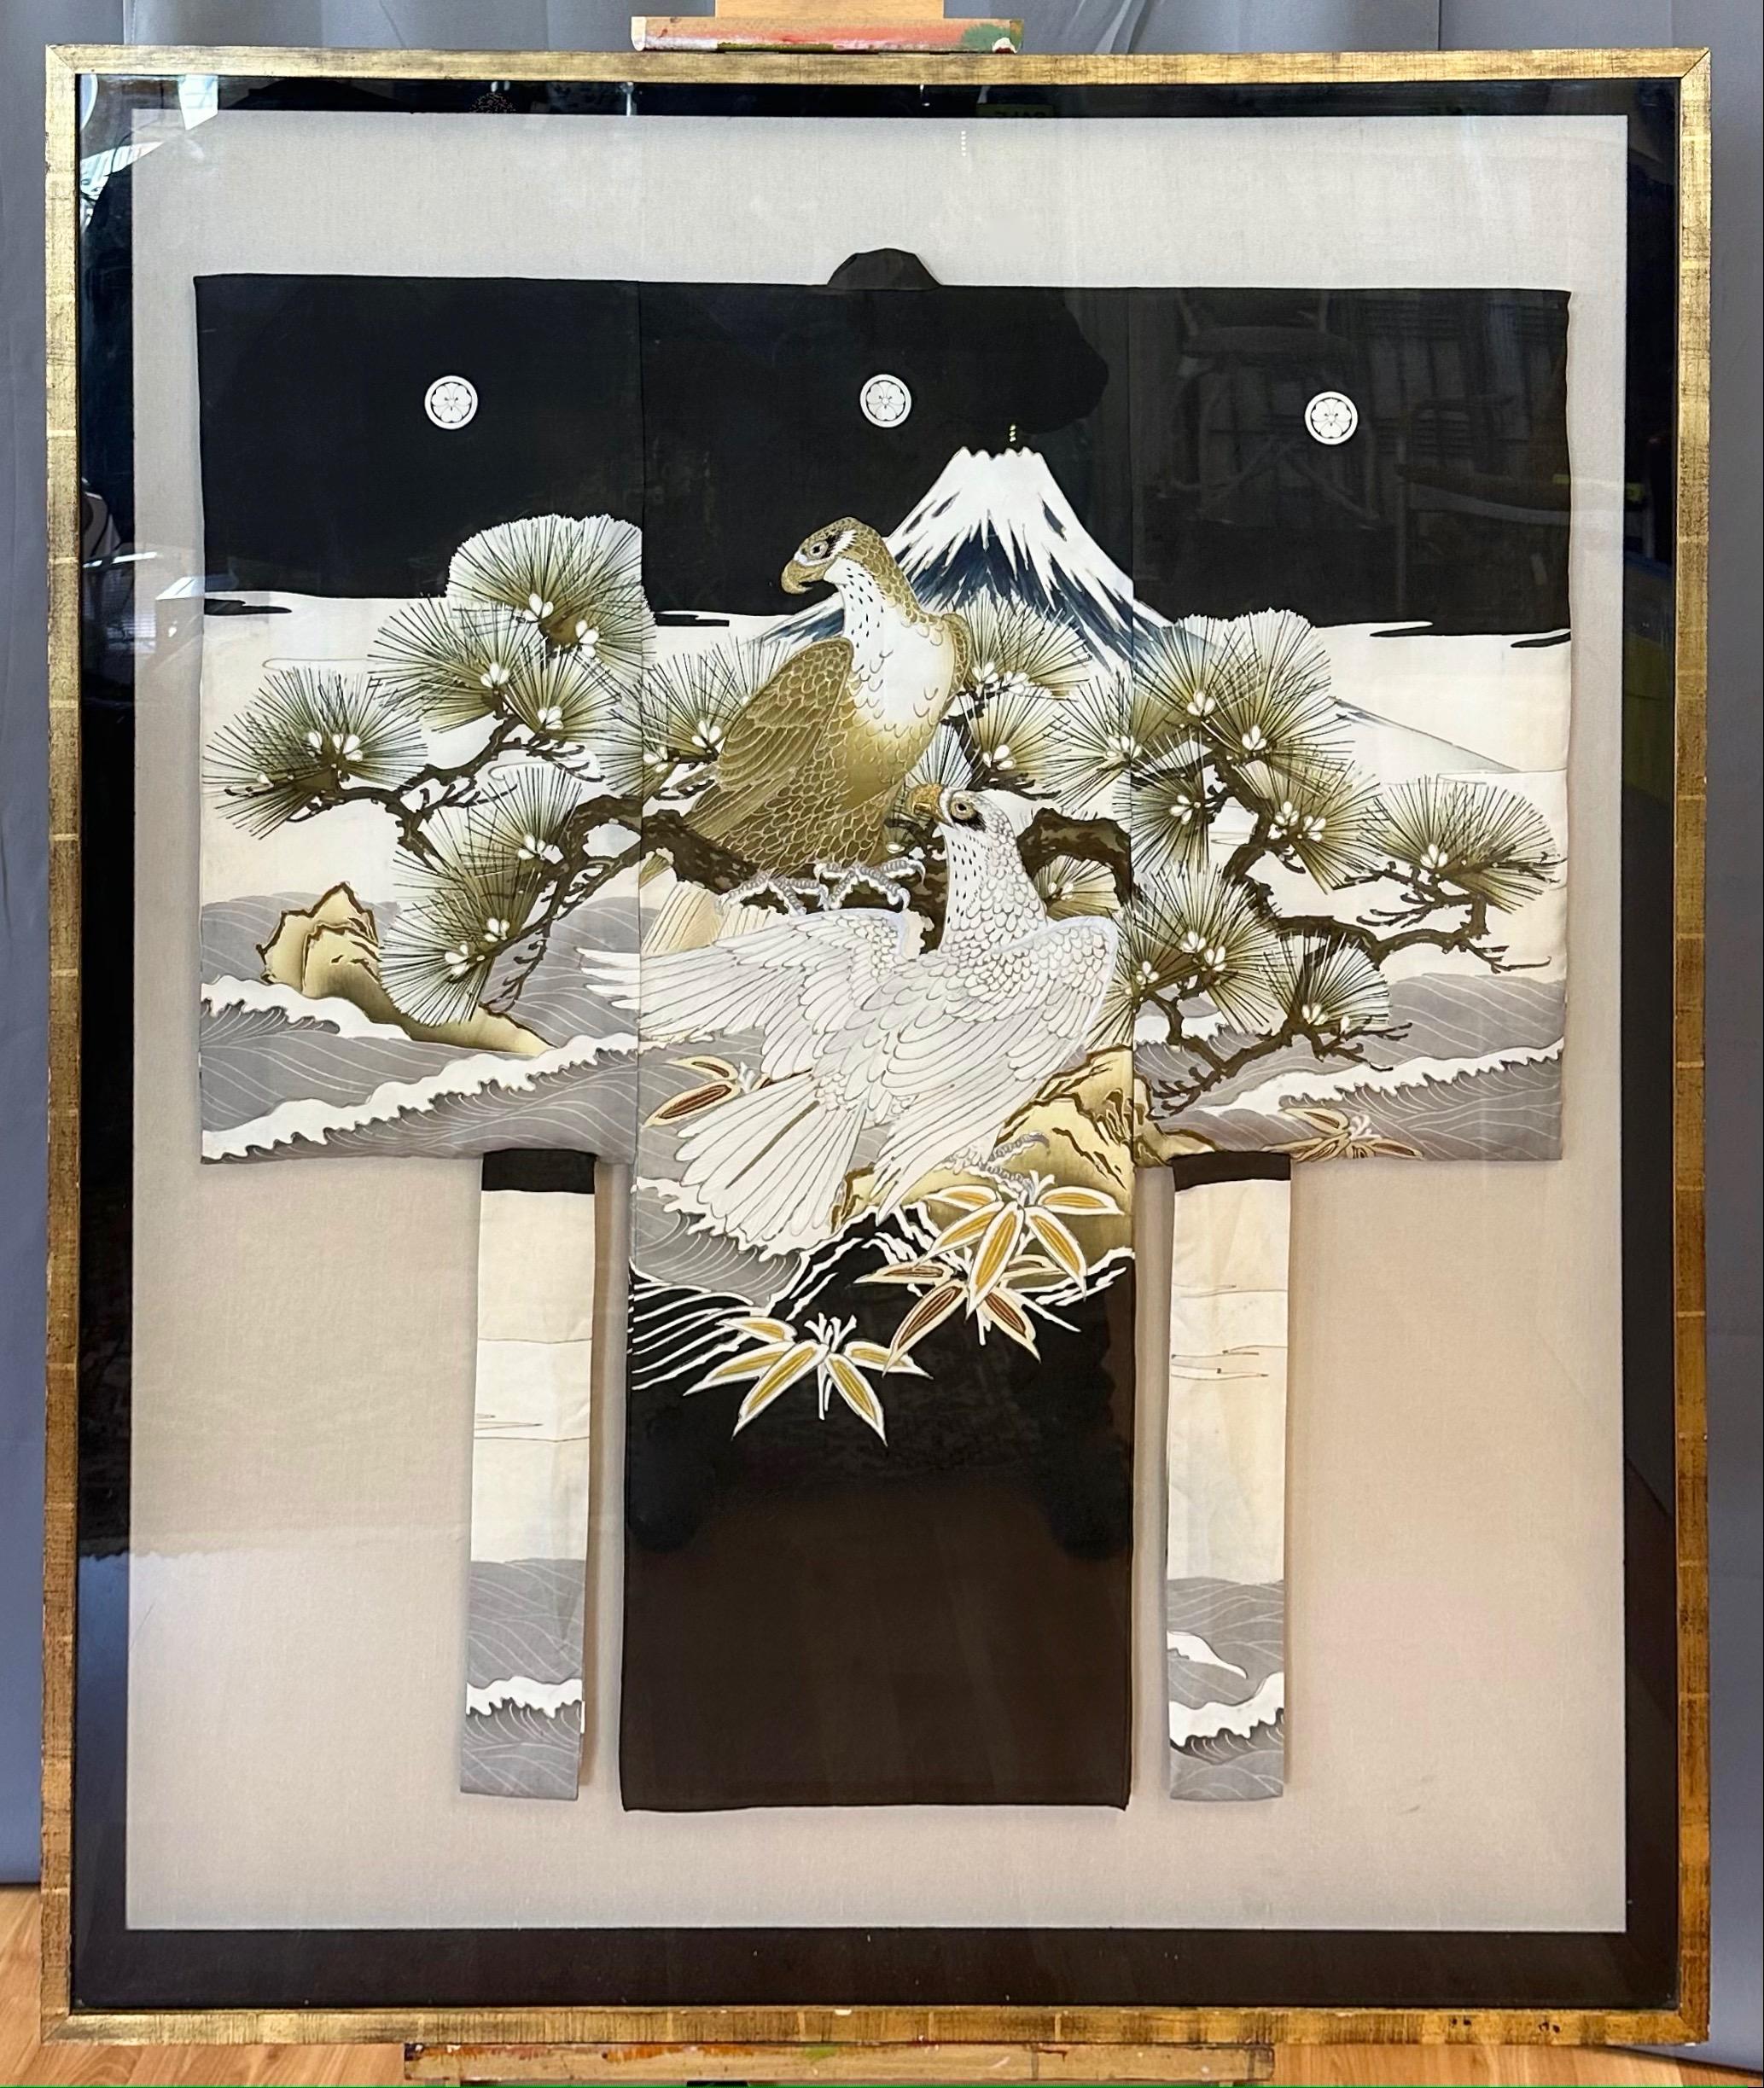 A majestic late 1980s Japanese Showa period Sakai clan hand-painted, dyed, and embroidered silk kimono with eagles and Mt. Fuji in a monumental custom-made silk-lined giltwood frame.

Features an epic and incredibly well executed hand-painted,